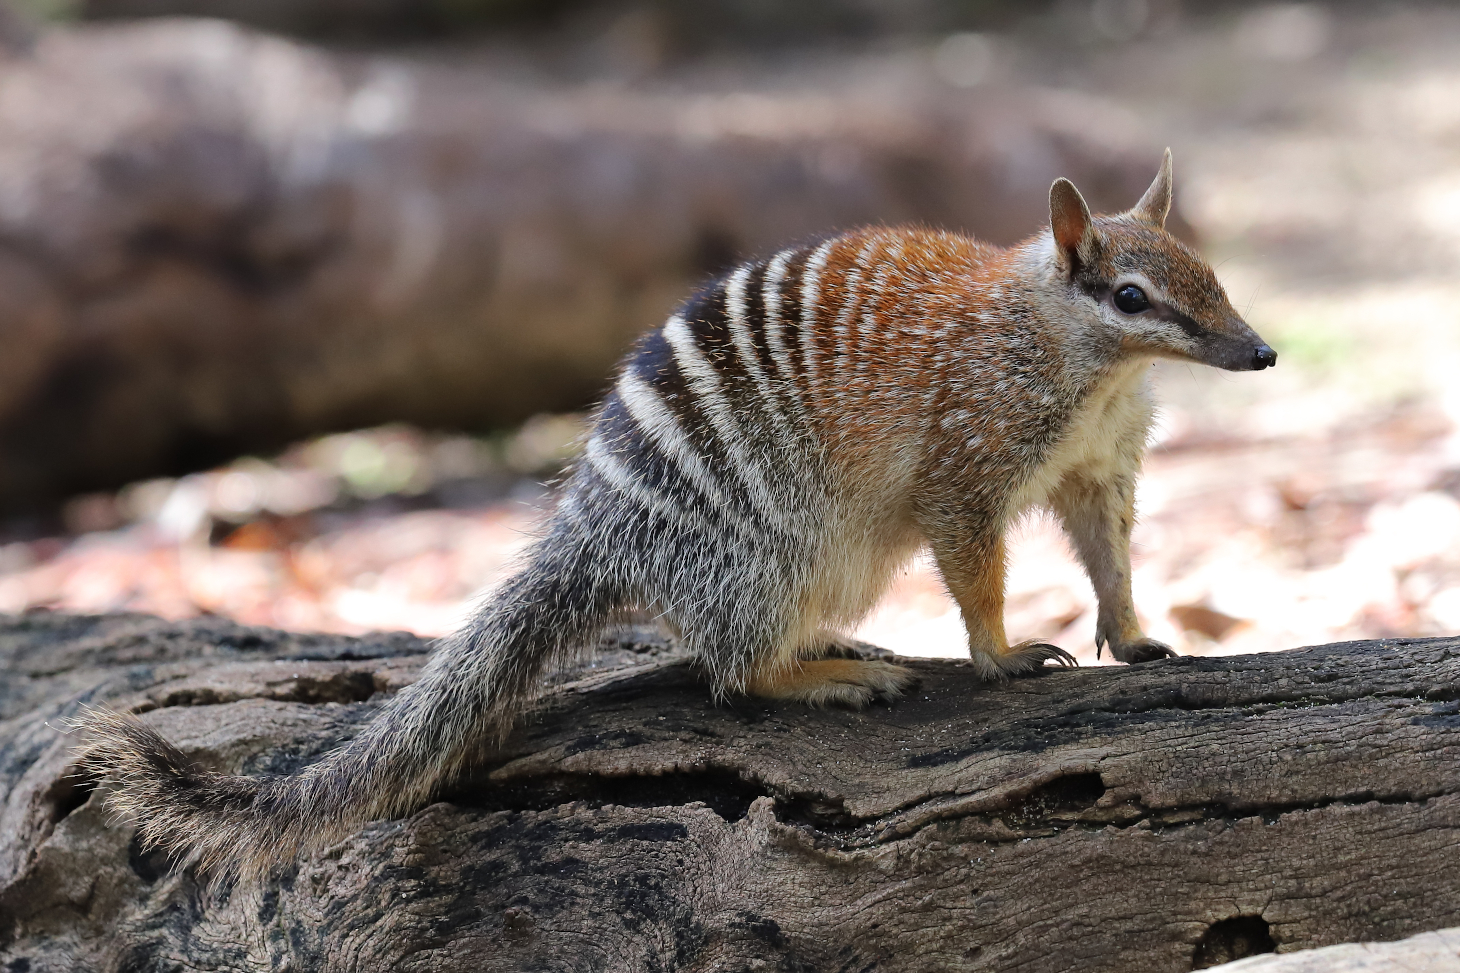 The numbat, a marsupial carnivore found only in the eucalyptus woods of South Australia. Predictions estimate a 54% reduction in its range by 2040-2060. Shutterstock